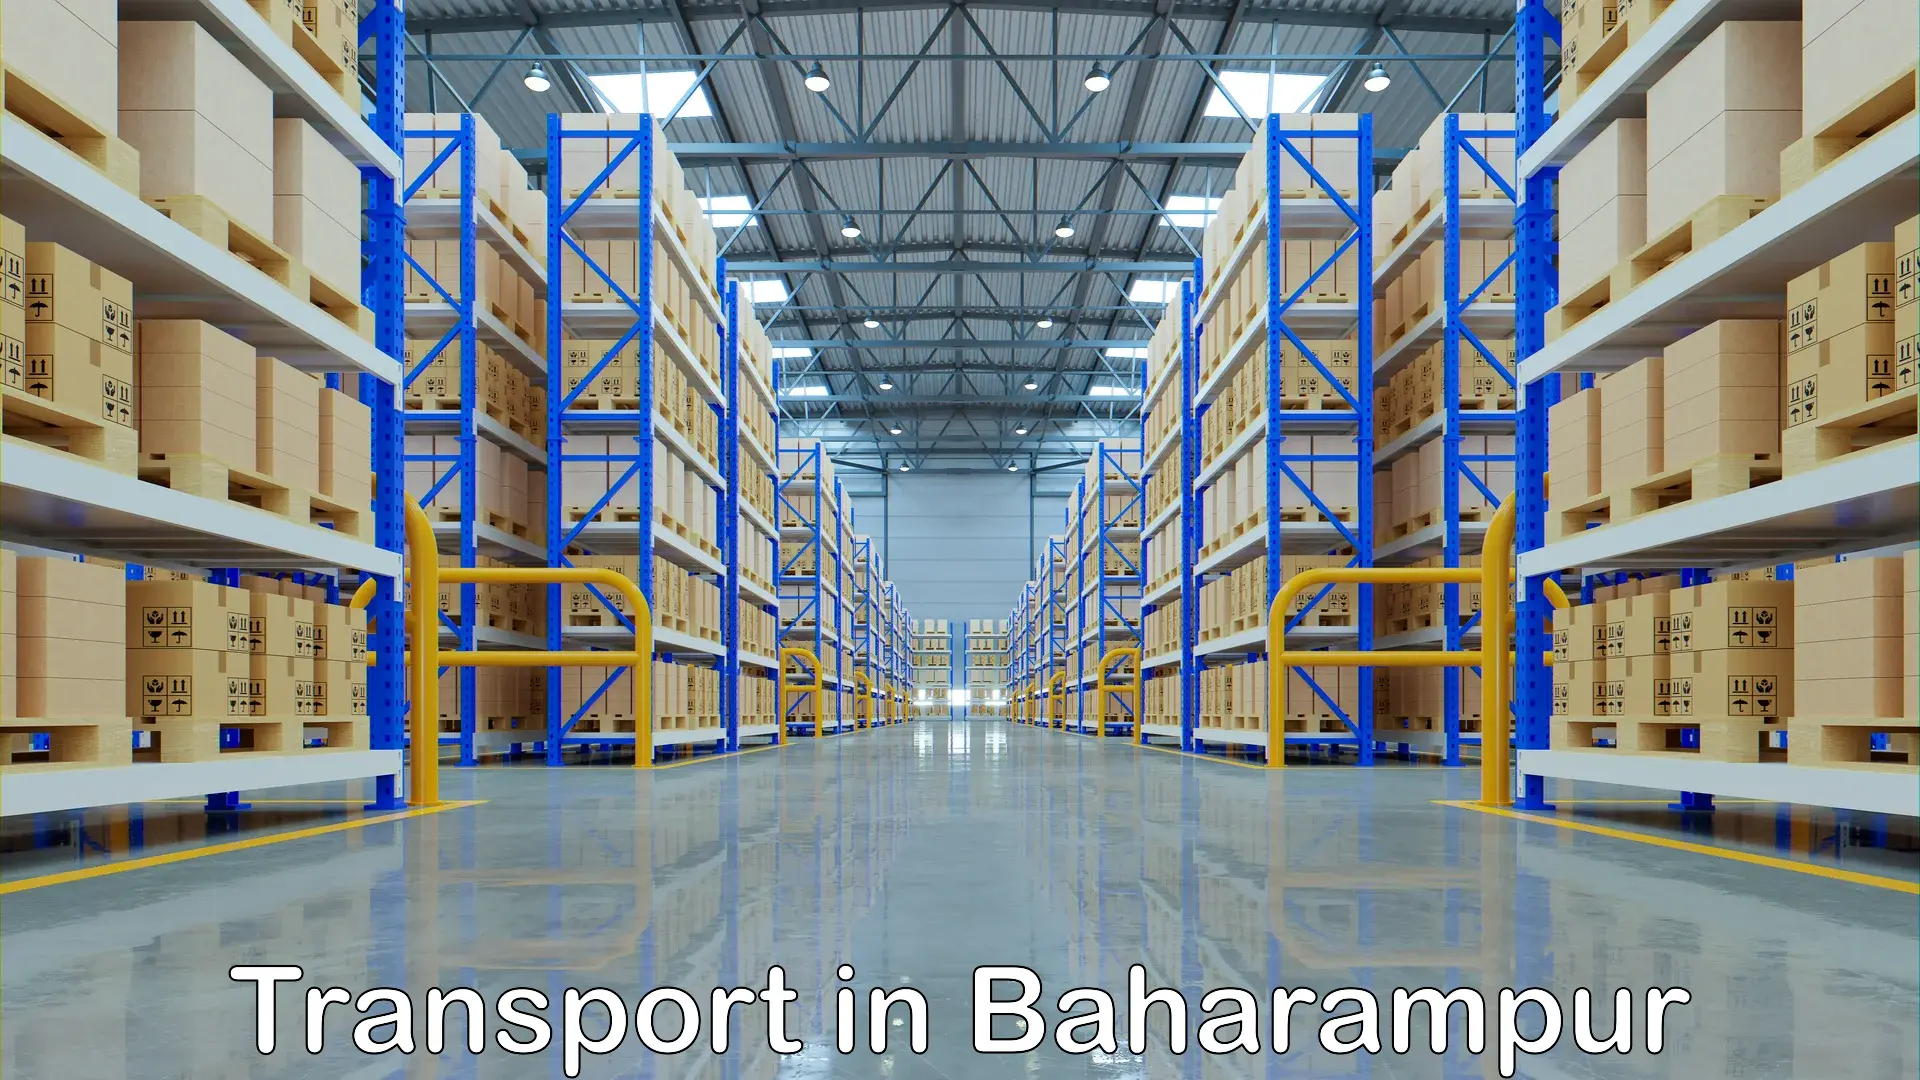 Vehicle transport services in Baharampur